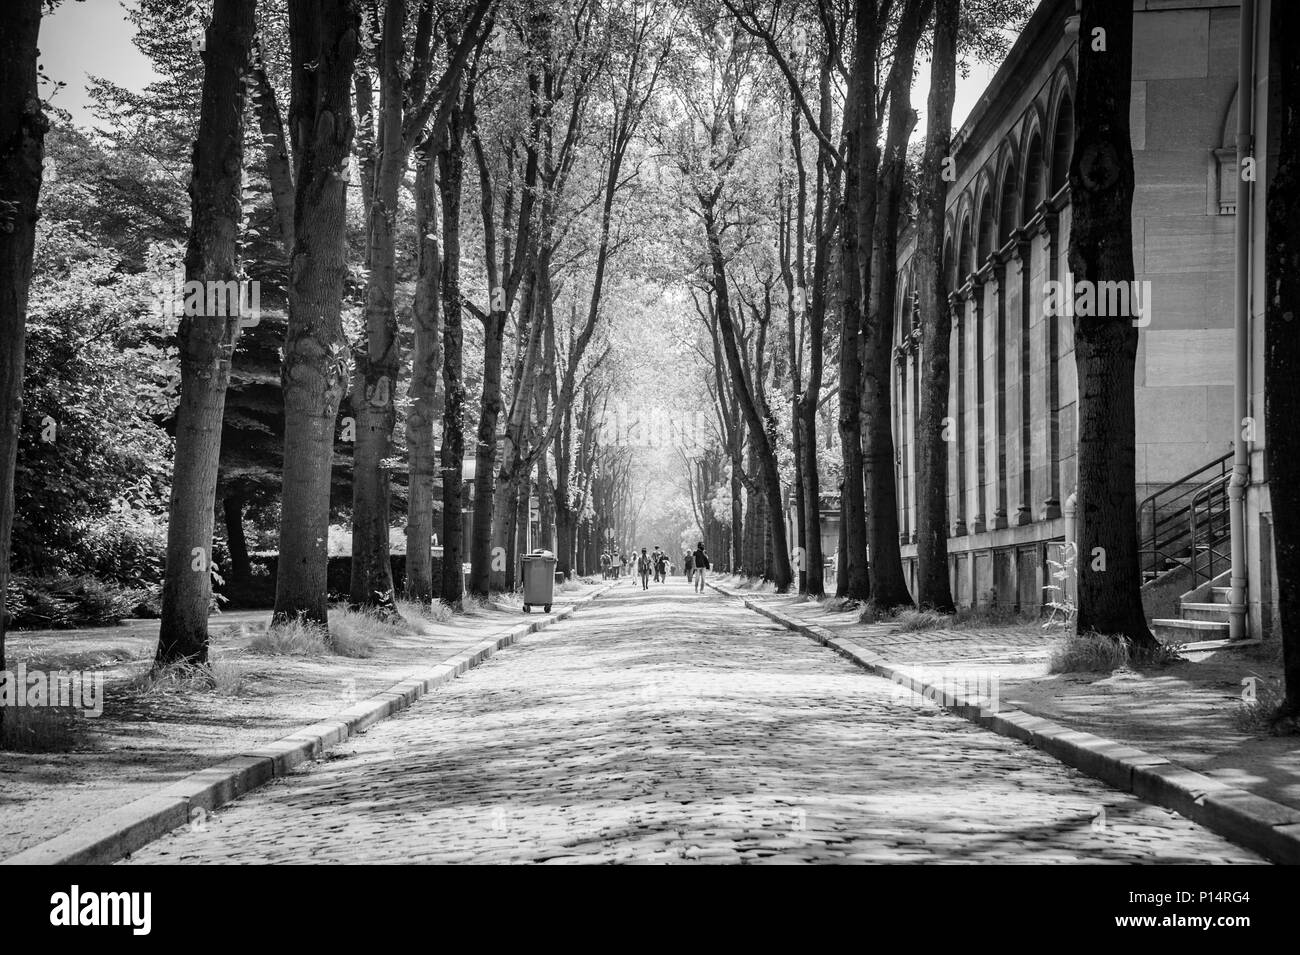 The wide, tree lined streets of Père Lachaise Cemetery are a perfect location for a stroll in summer.  Paris, France Stock Photo